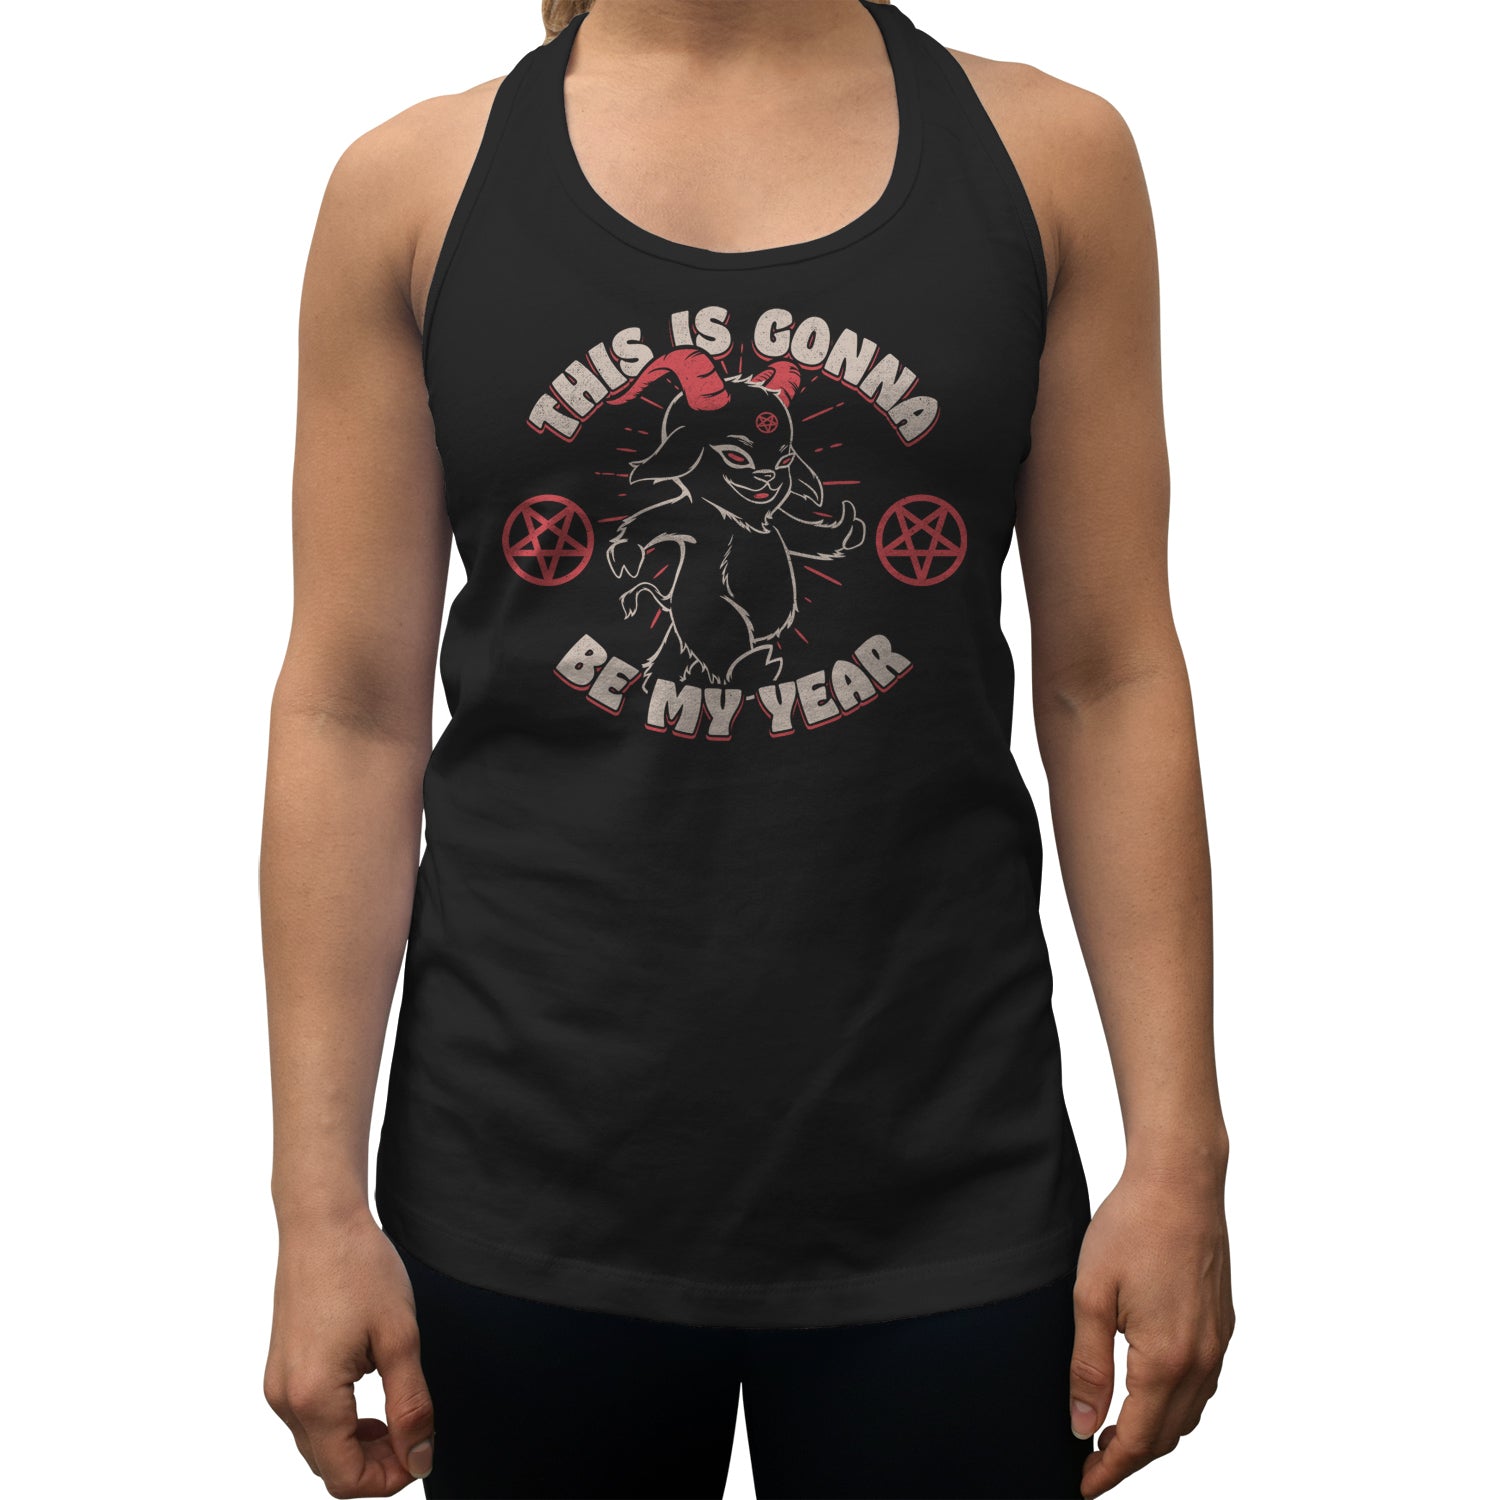 Women's This is Gonna Be My Year Devil Racerback Tank Top